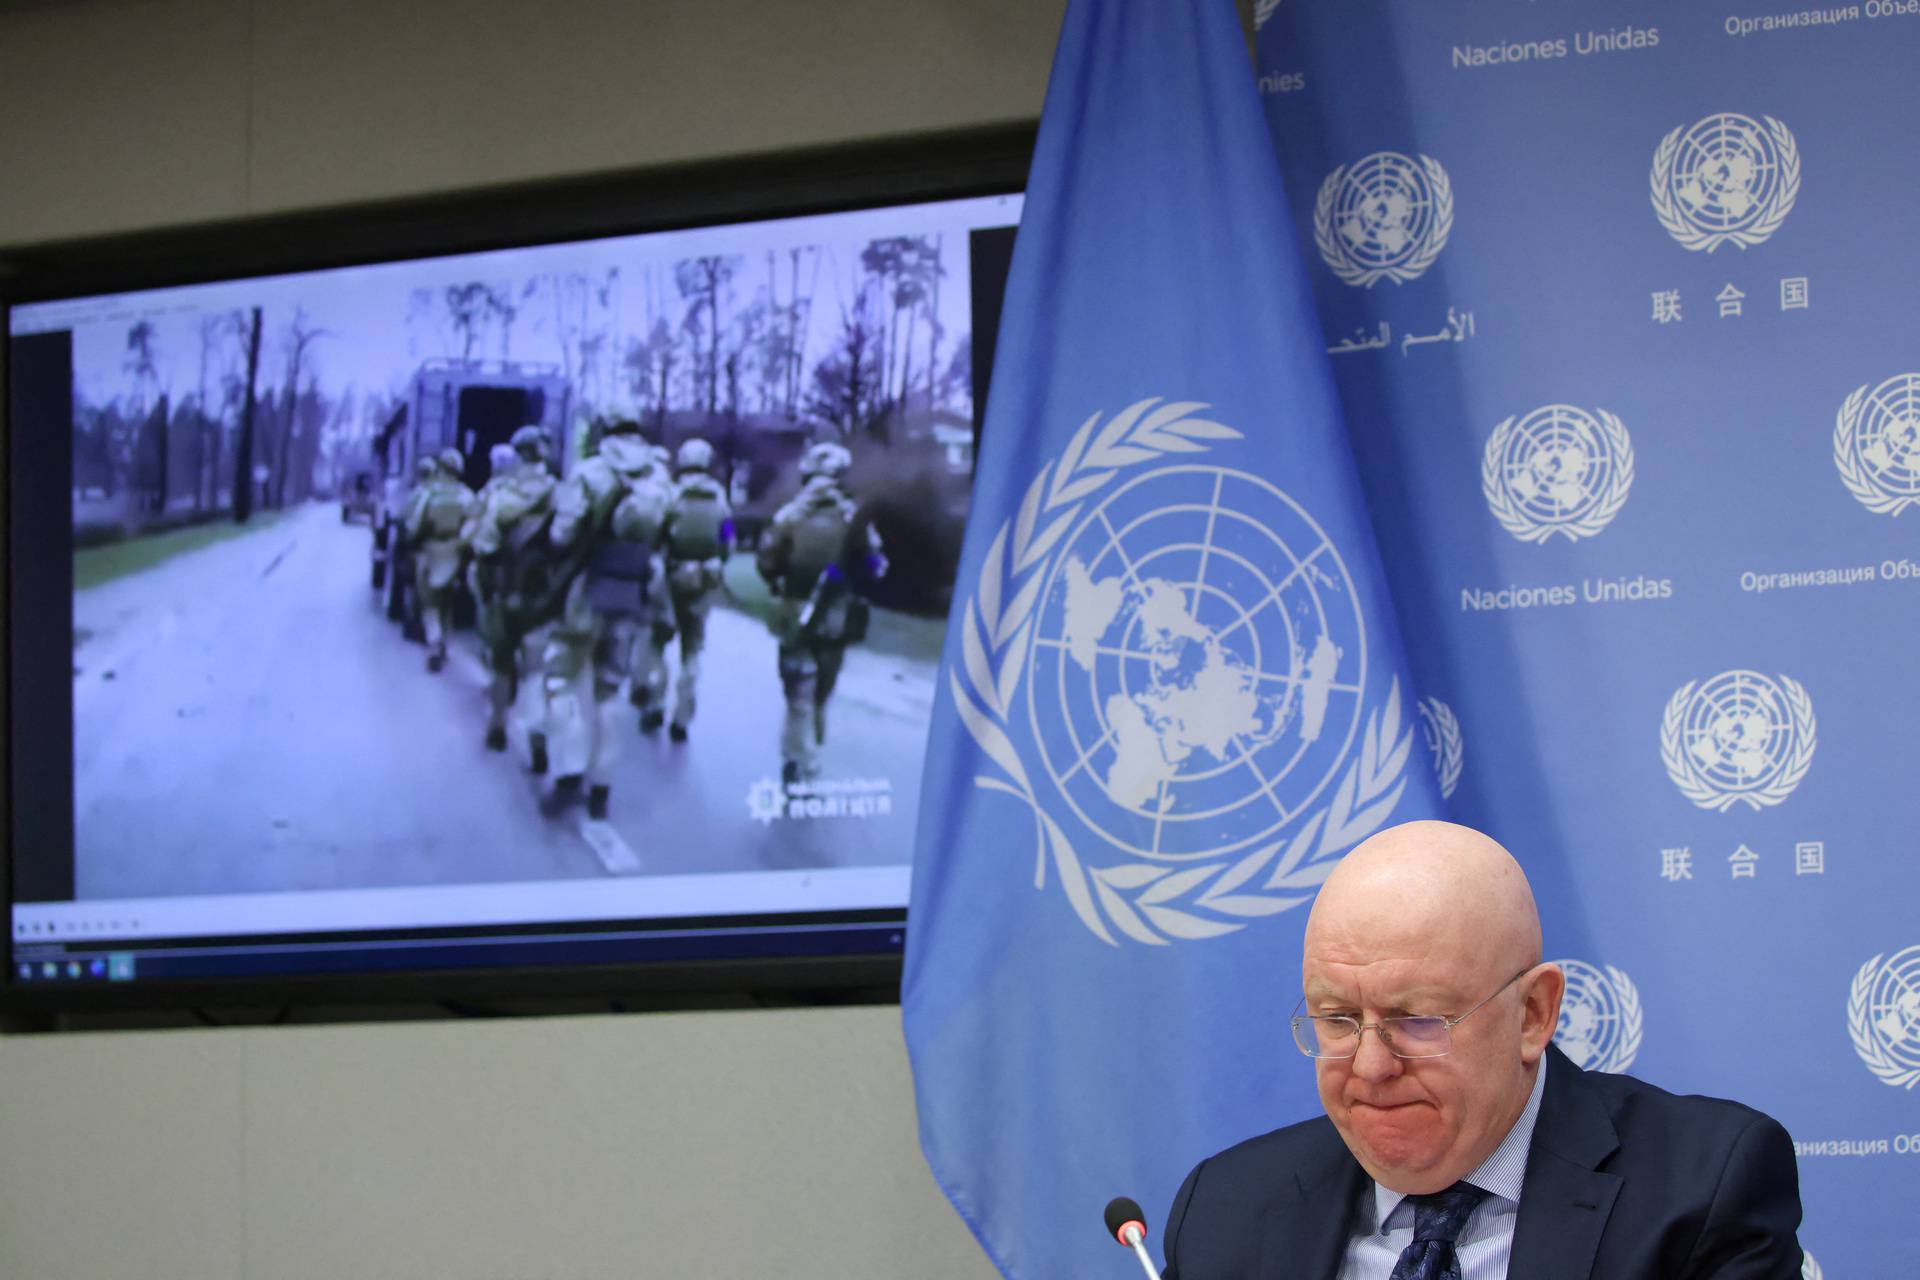 Russian Ambassador to the UN Vassily Nebenzia plays video allegedly captured in Ukraine to journalists as he addresses the Russian invasion of Ukraine at the United Nations Headquarters in New York City